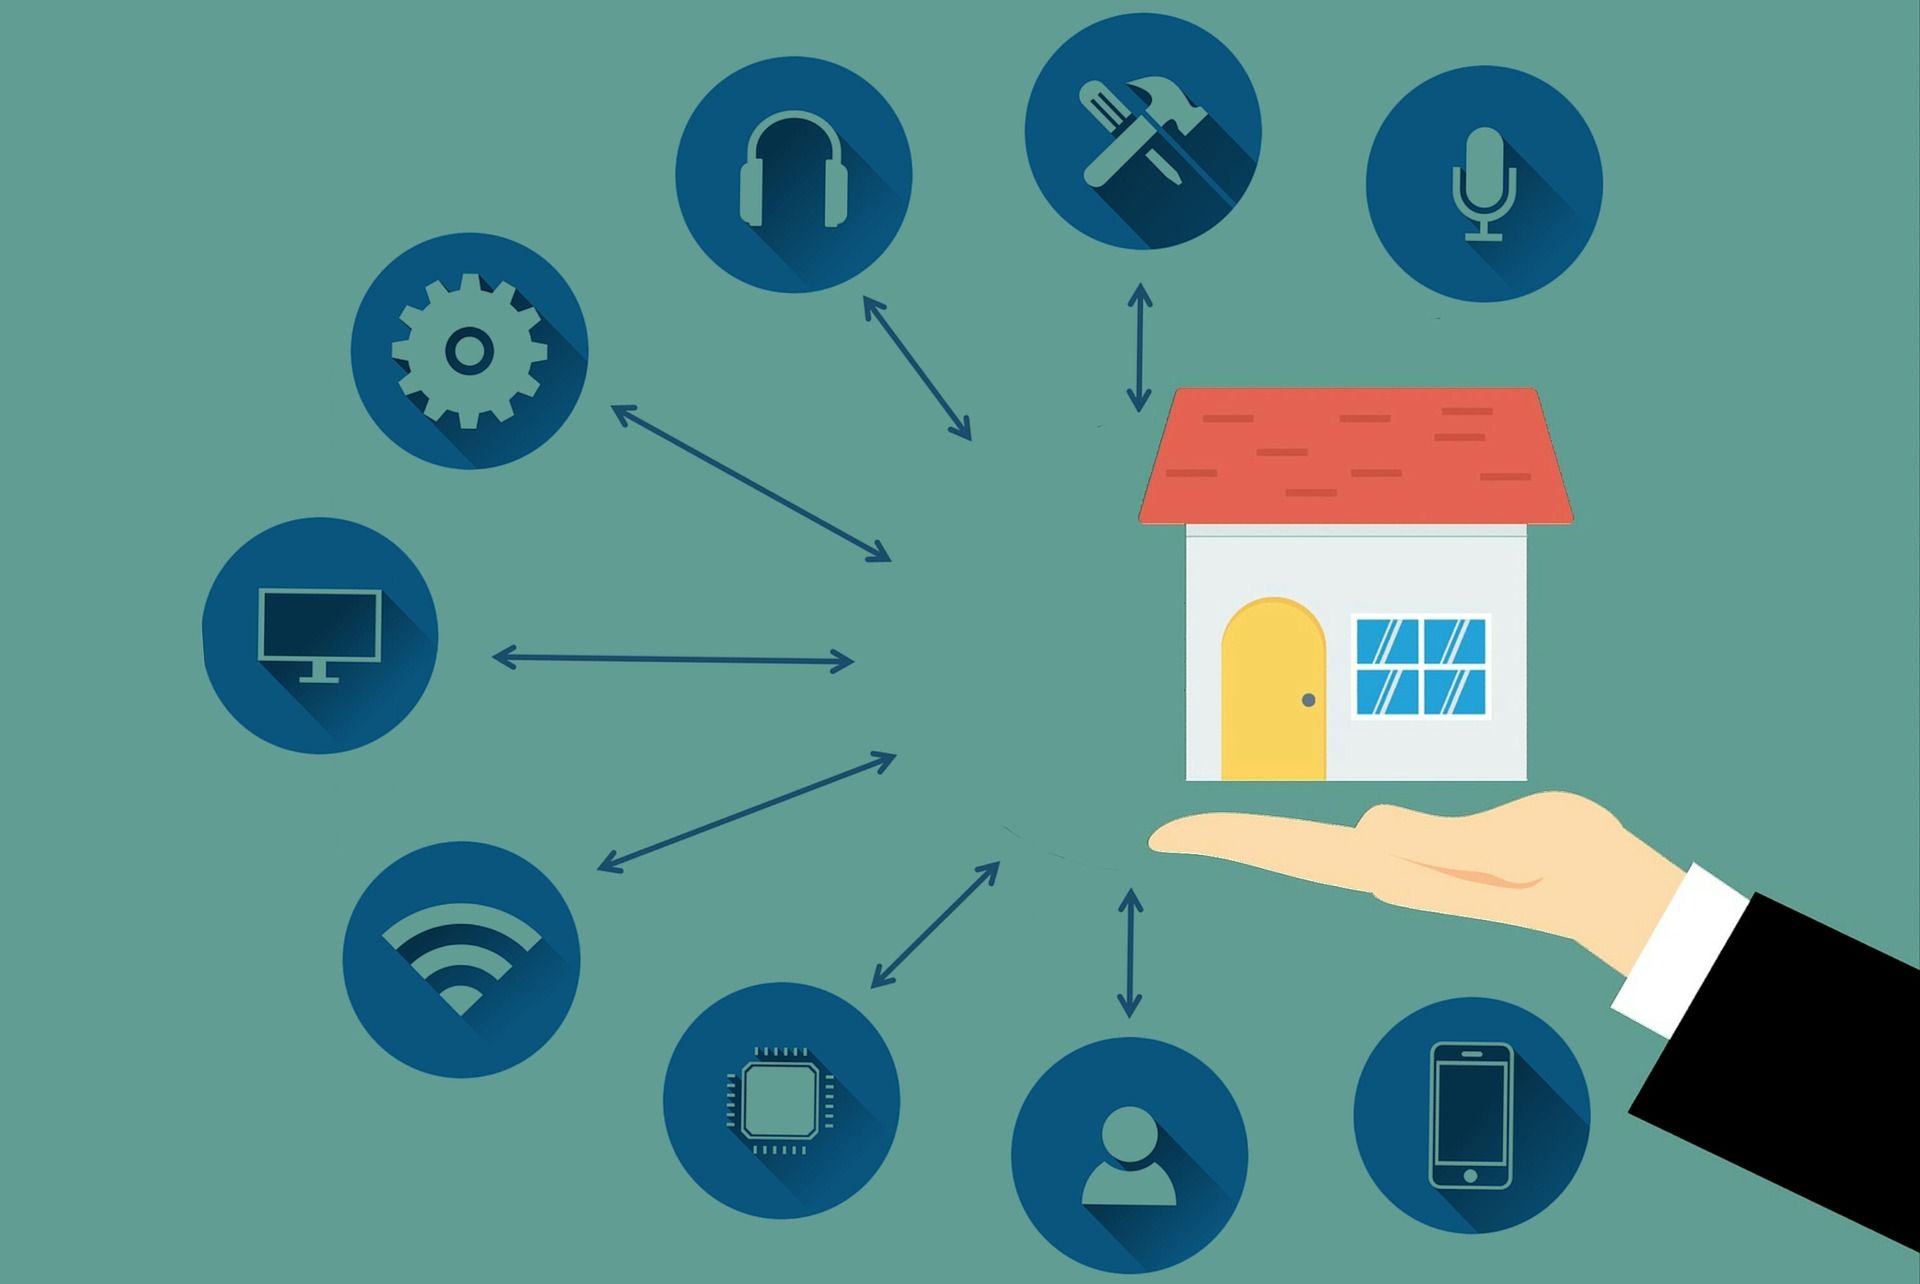 A smart home's devices